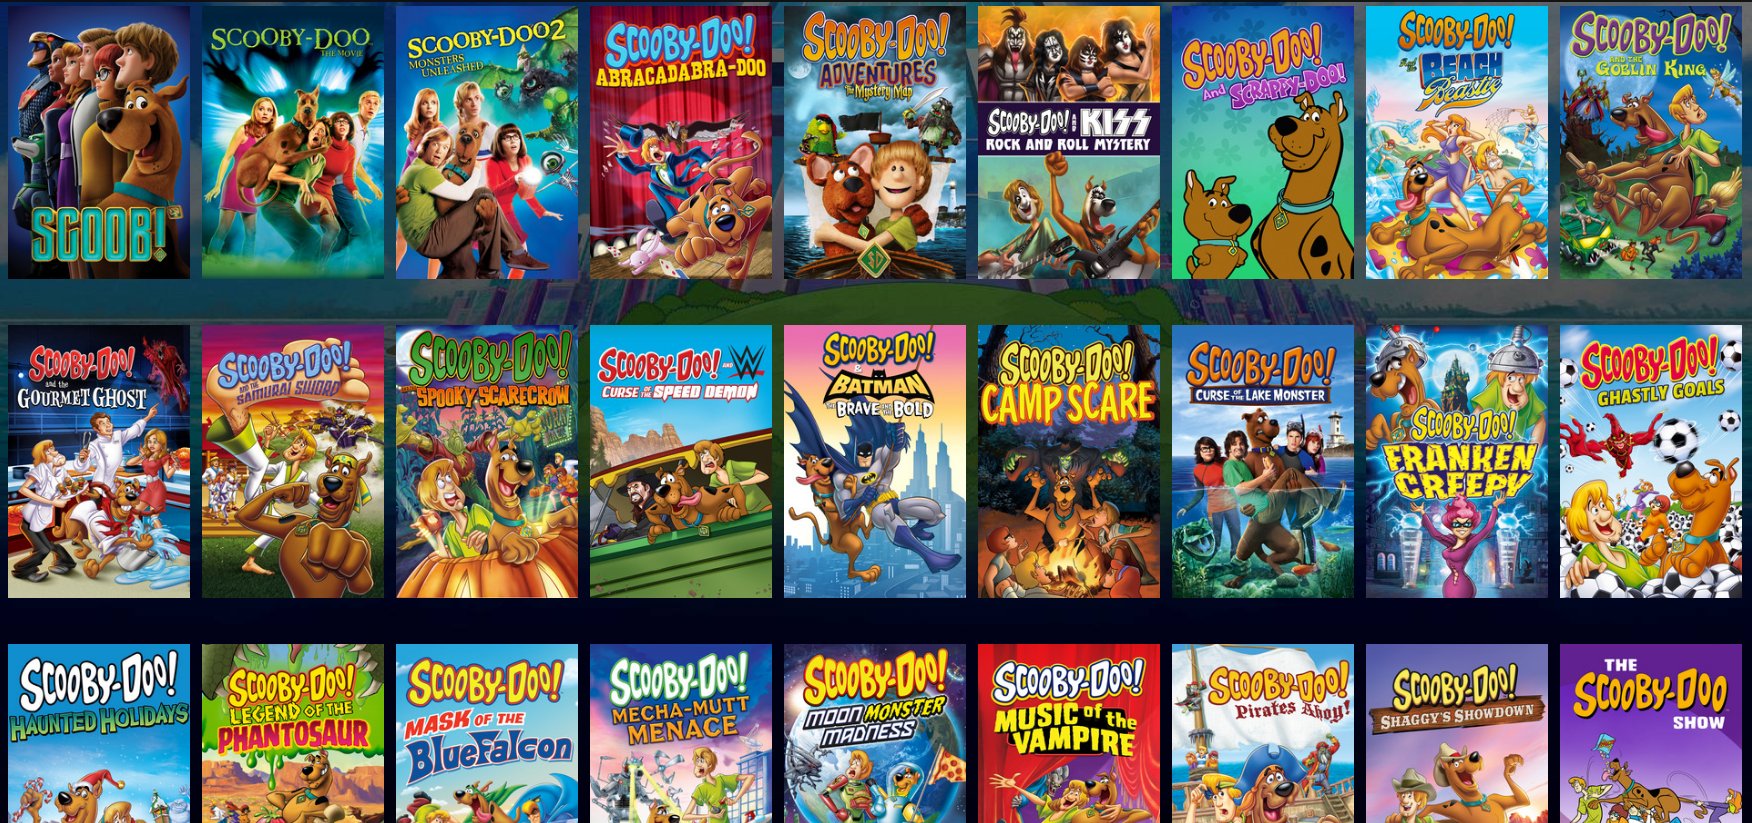 cree on Twitter: "they added every single scooby doo movie and show to